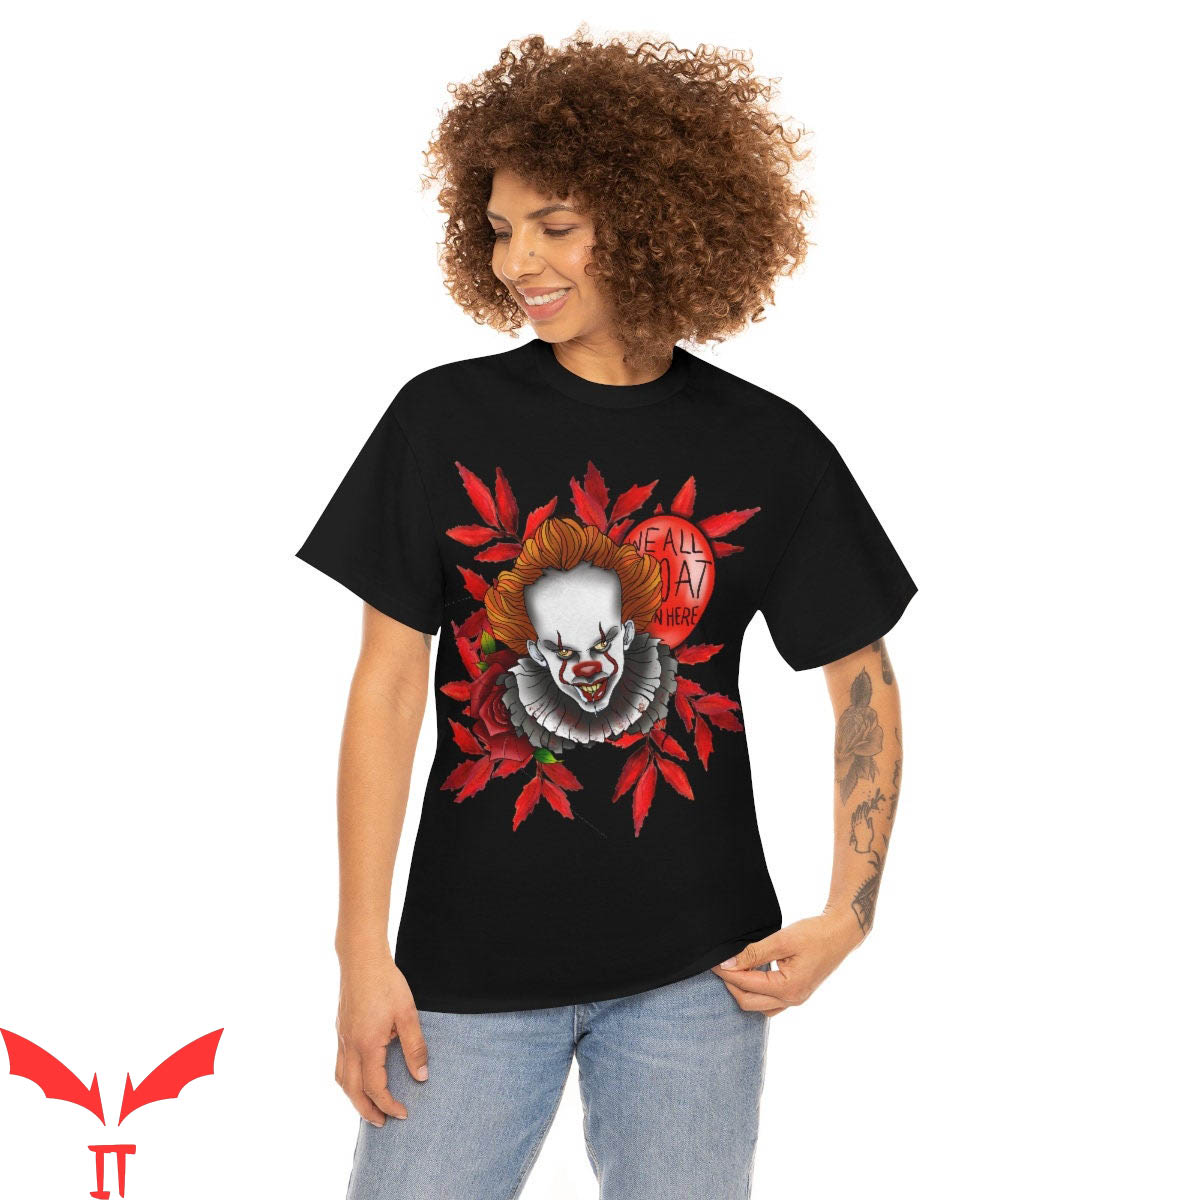 We All Float Down Here T-Shirt Pennywise IT Horror Halloween